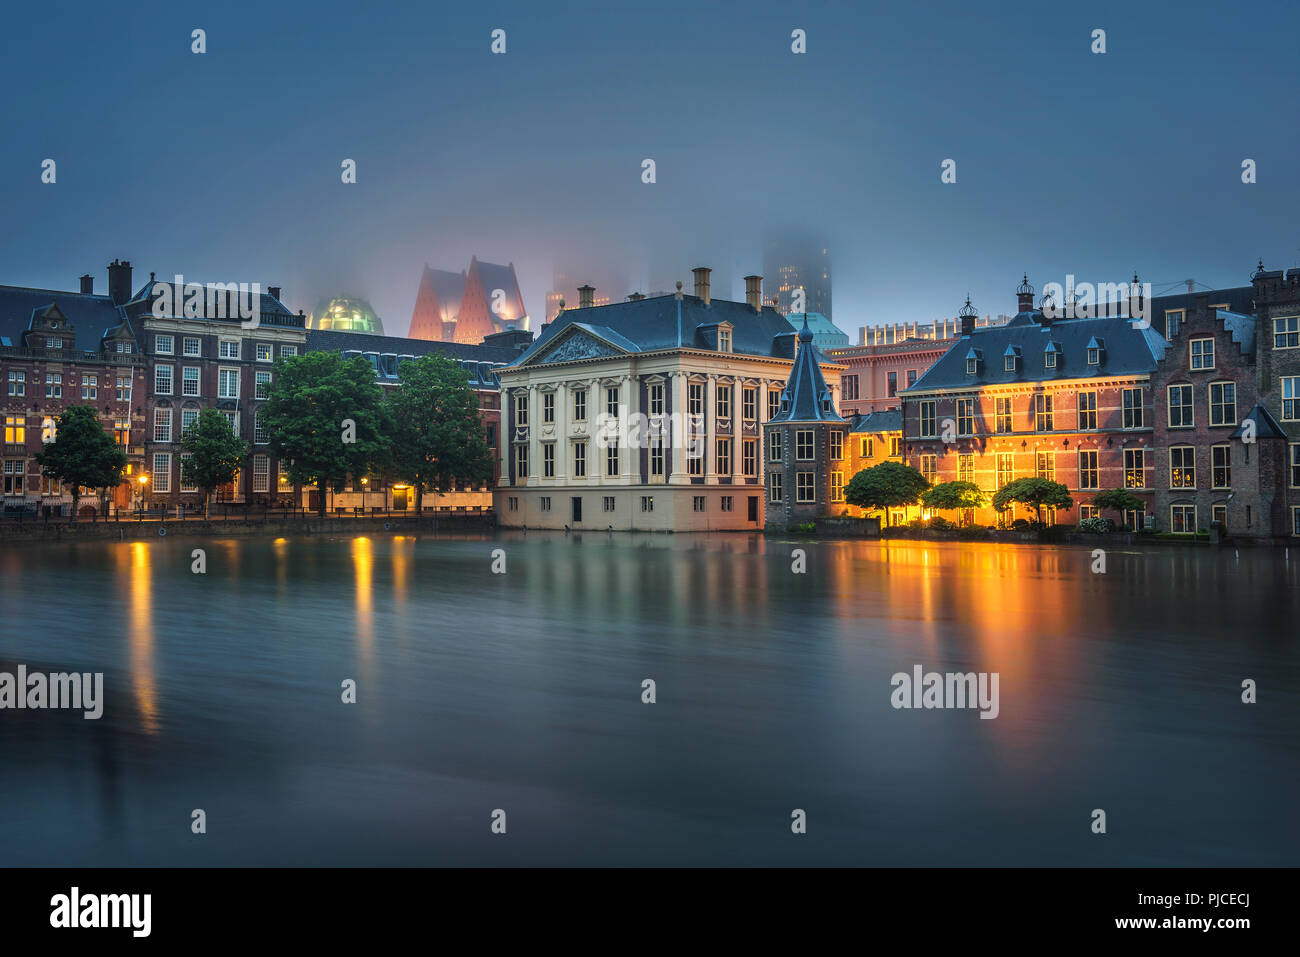 Government buildings in the centre of Den Haag, Netherlands Stock Photo